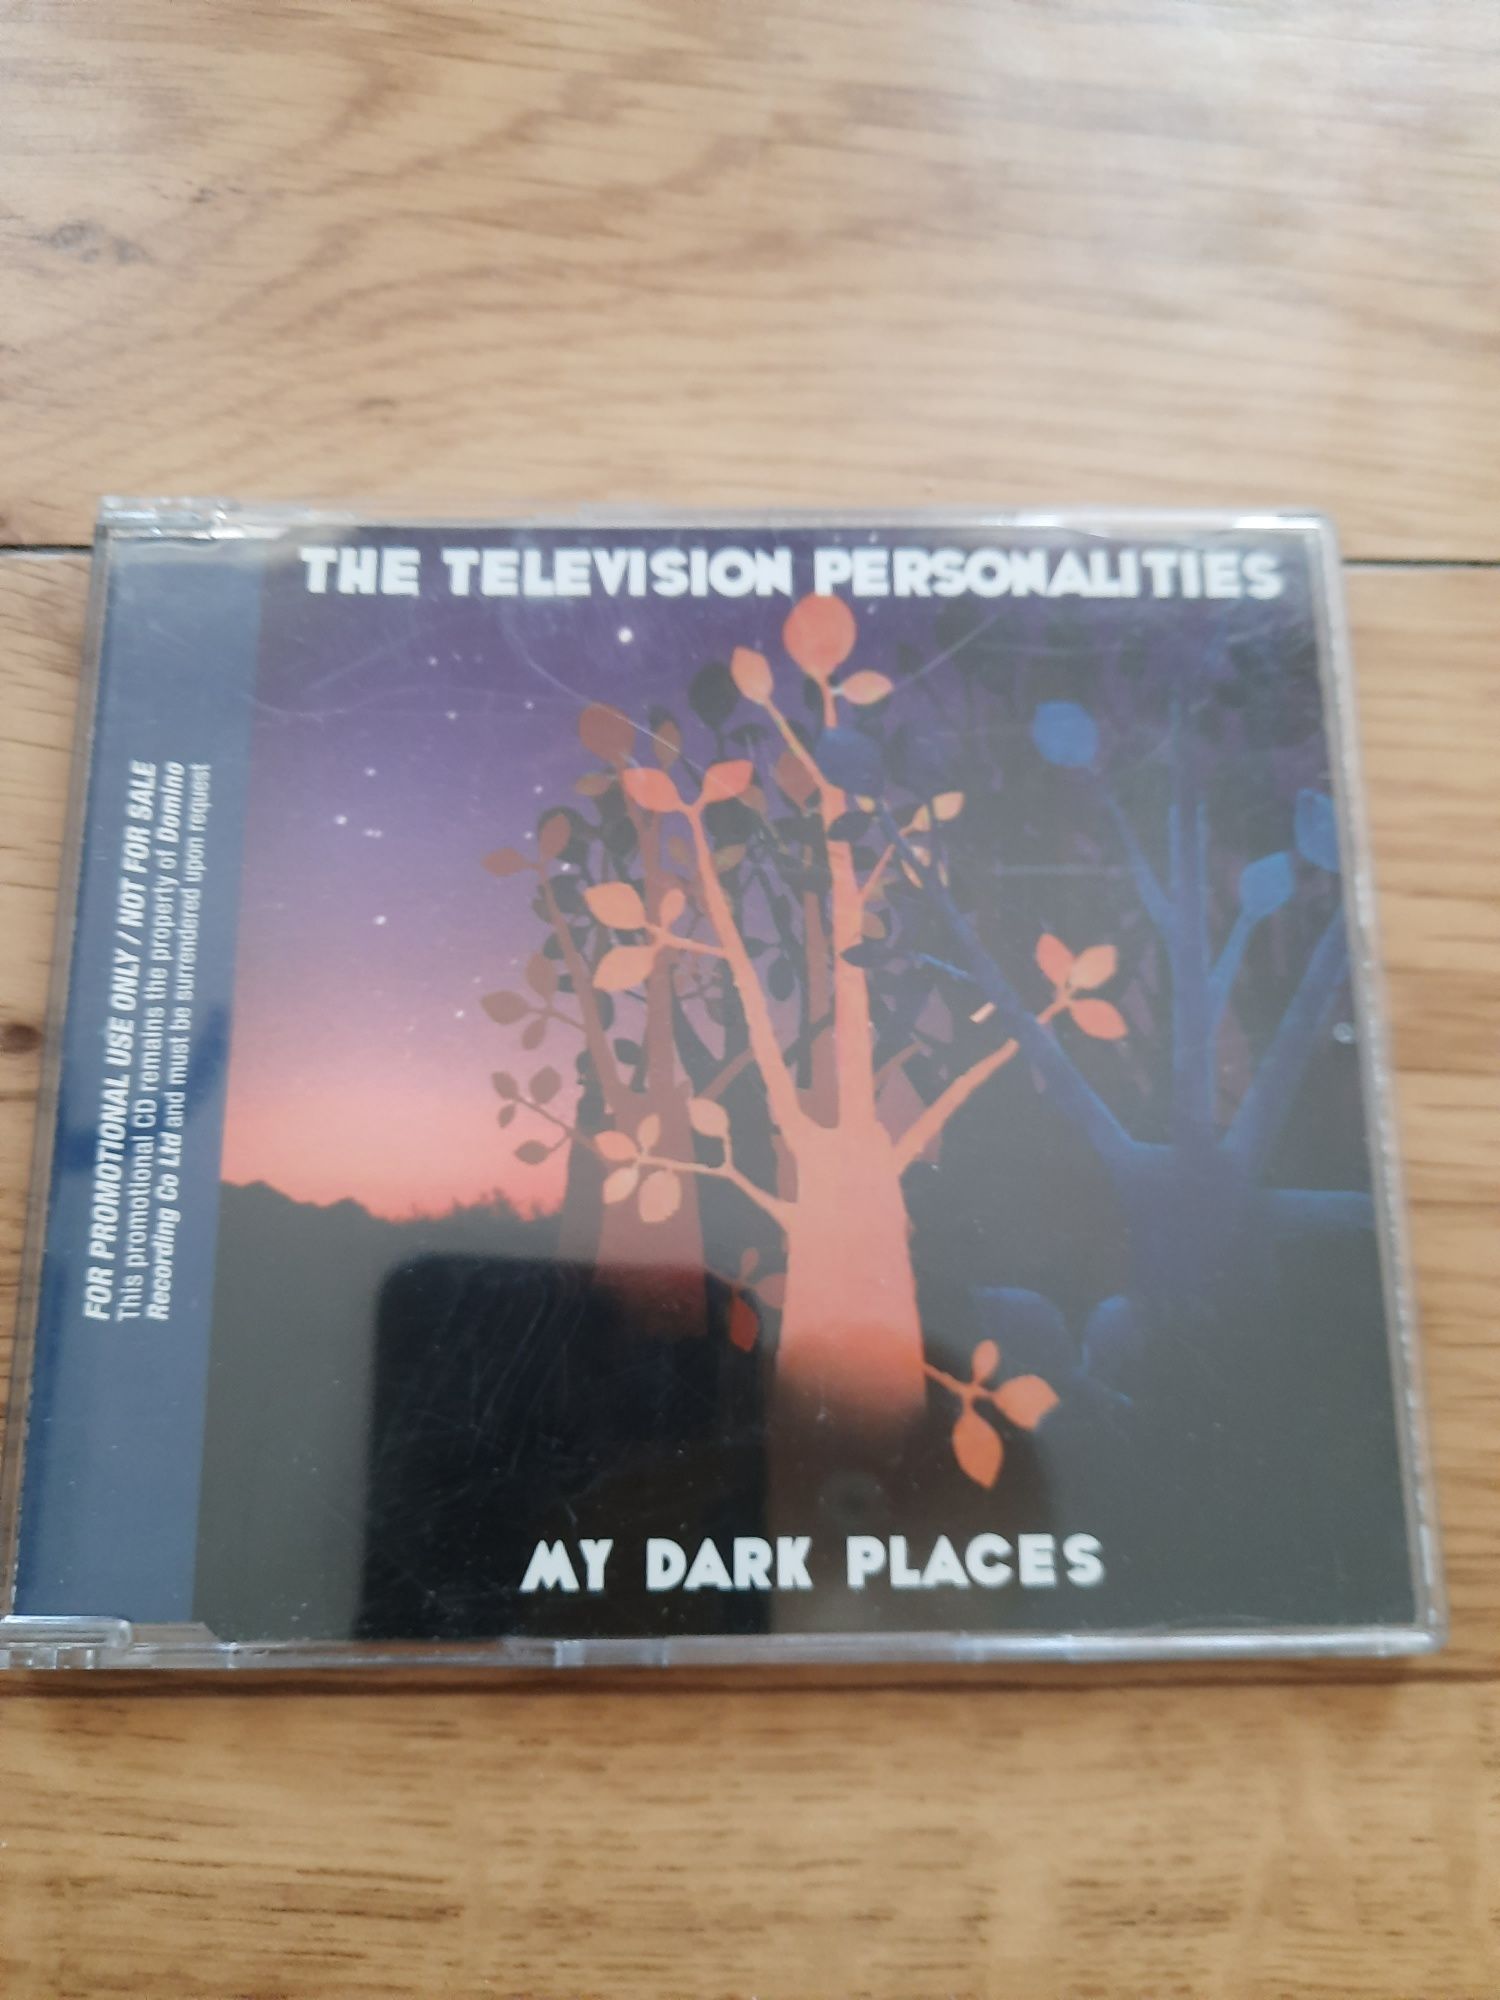 Television Personalities "My Dark Places" (promo)